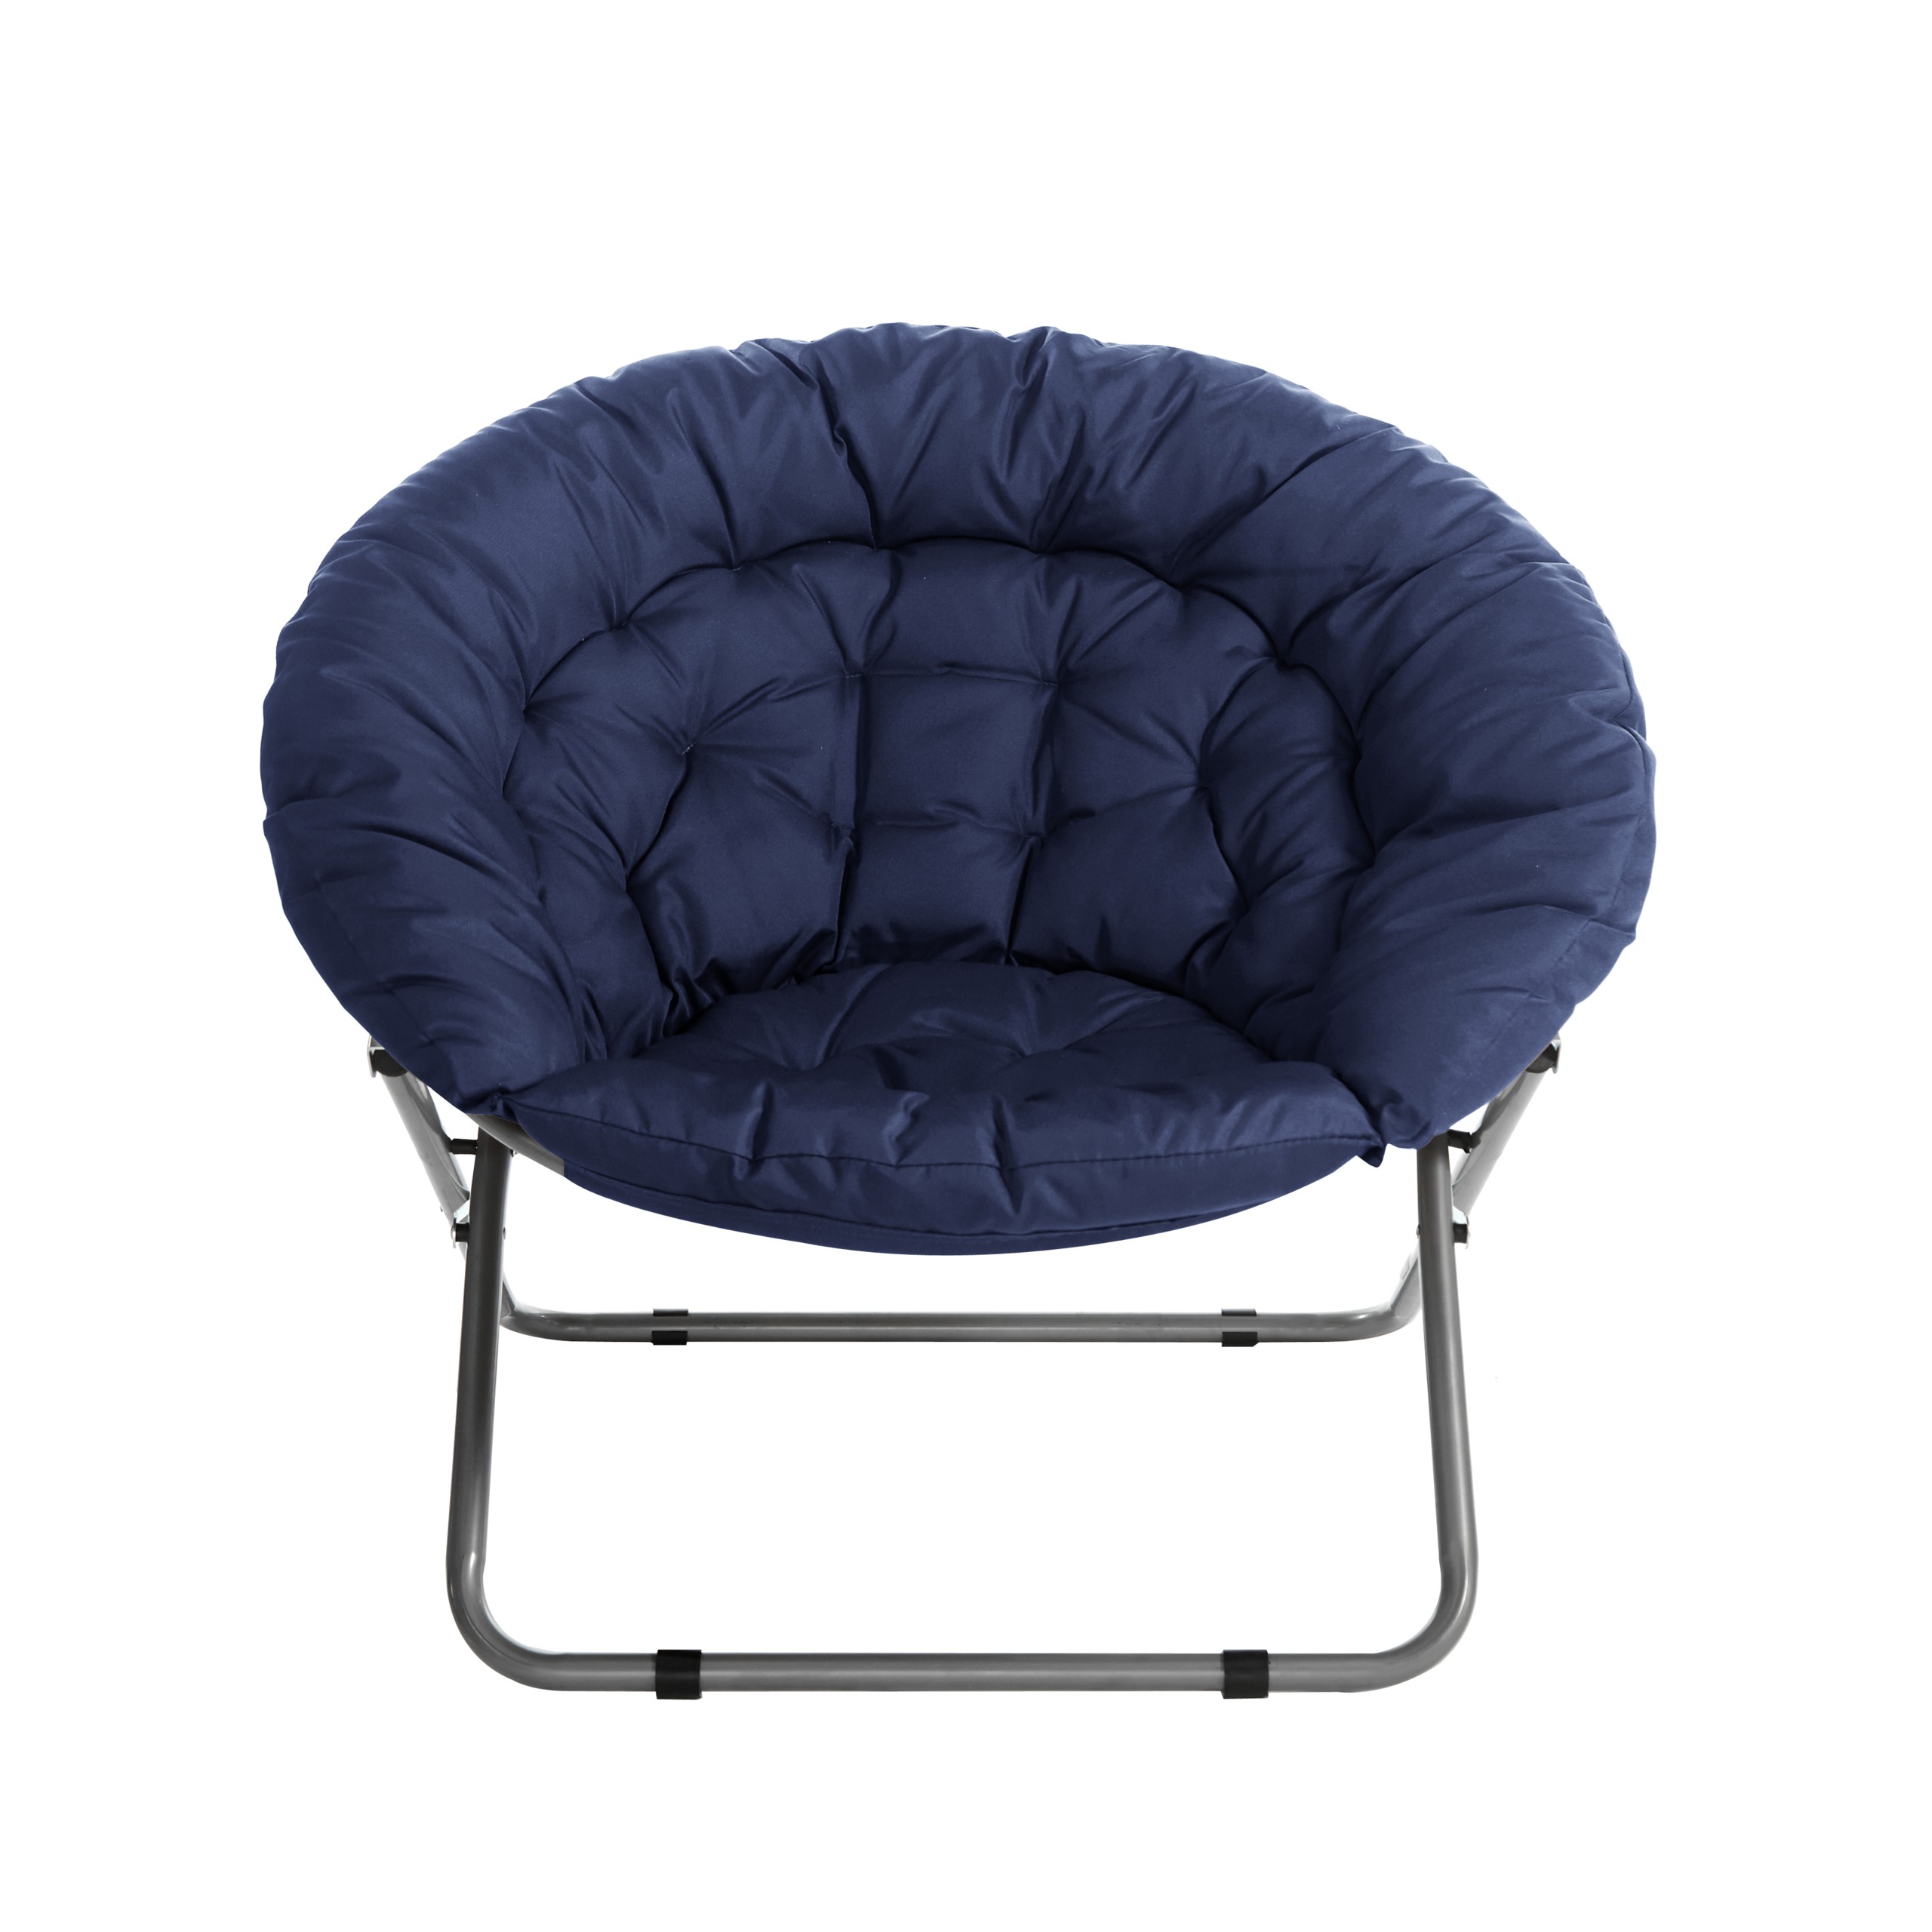 Urban shop oversized moon chair available in multiple 1